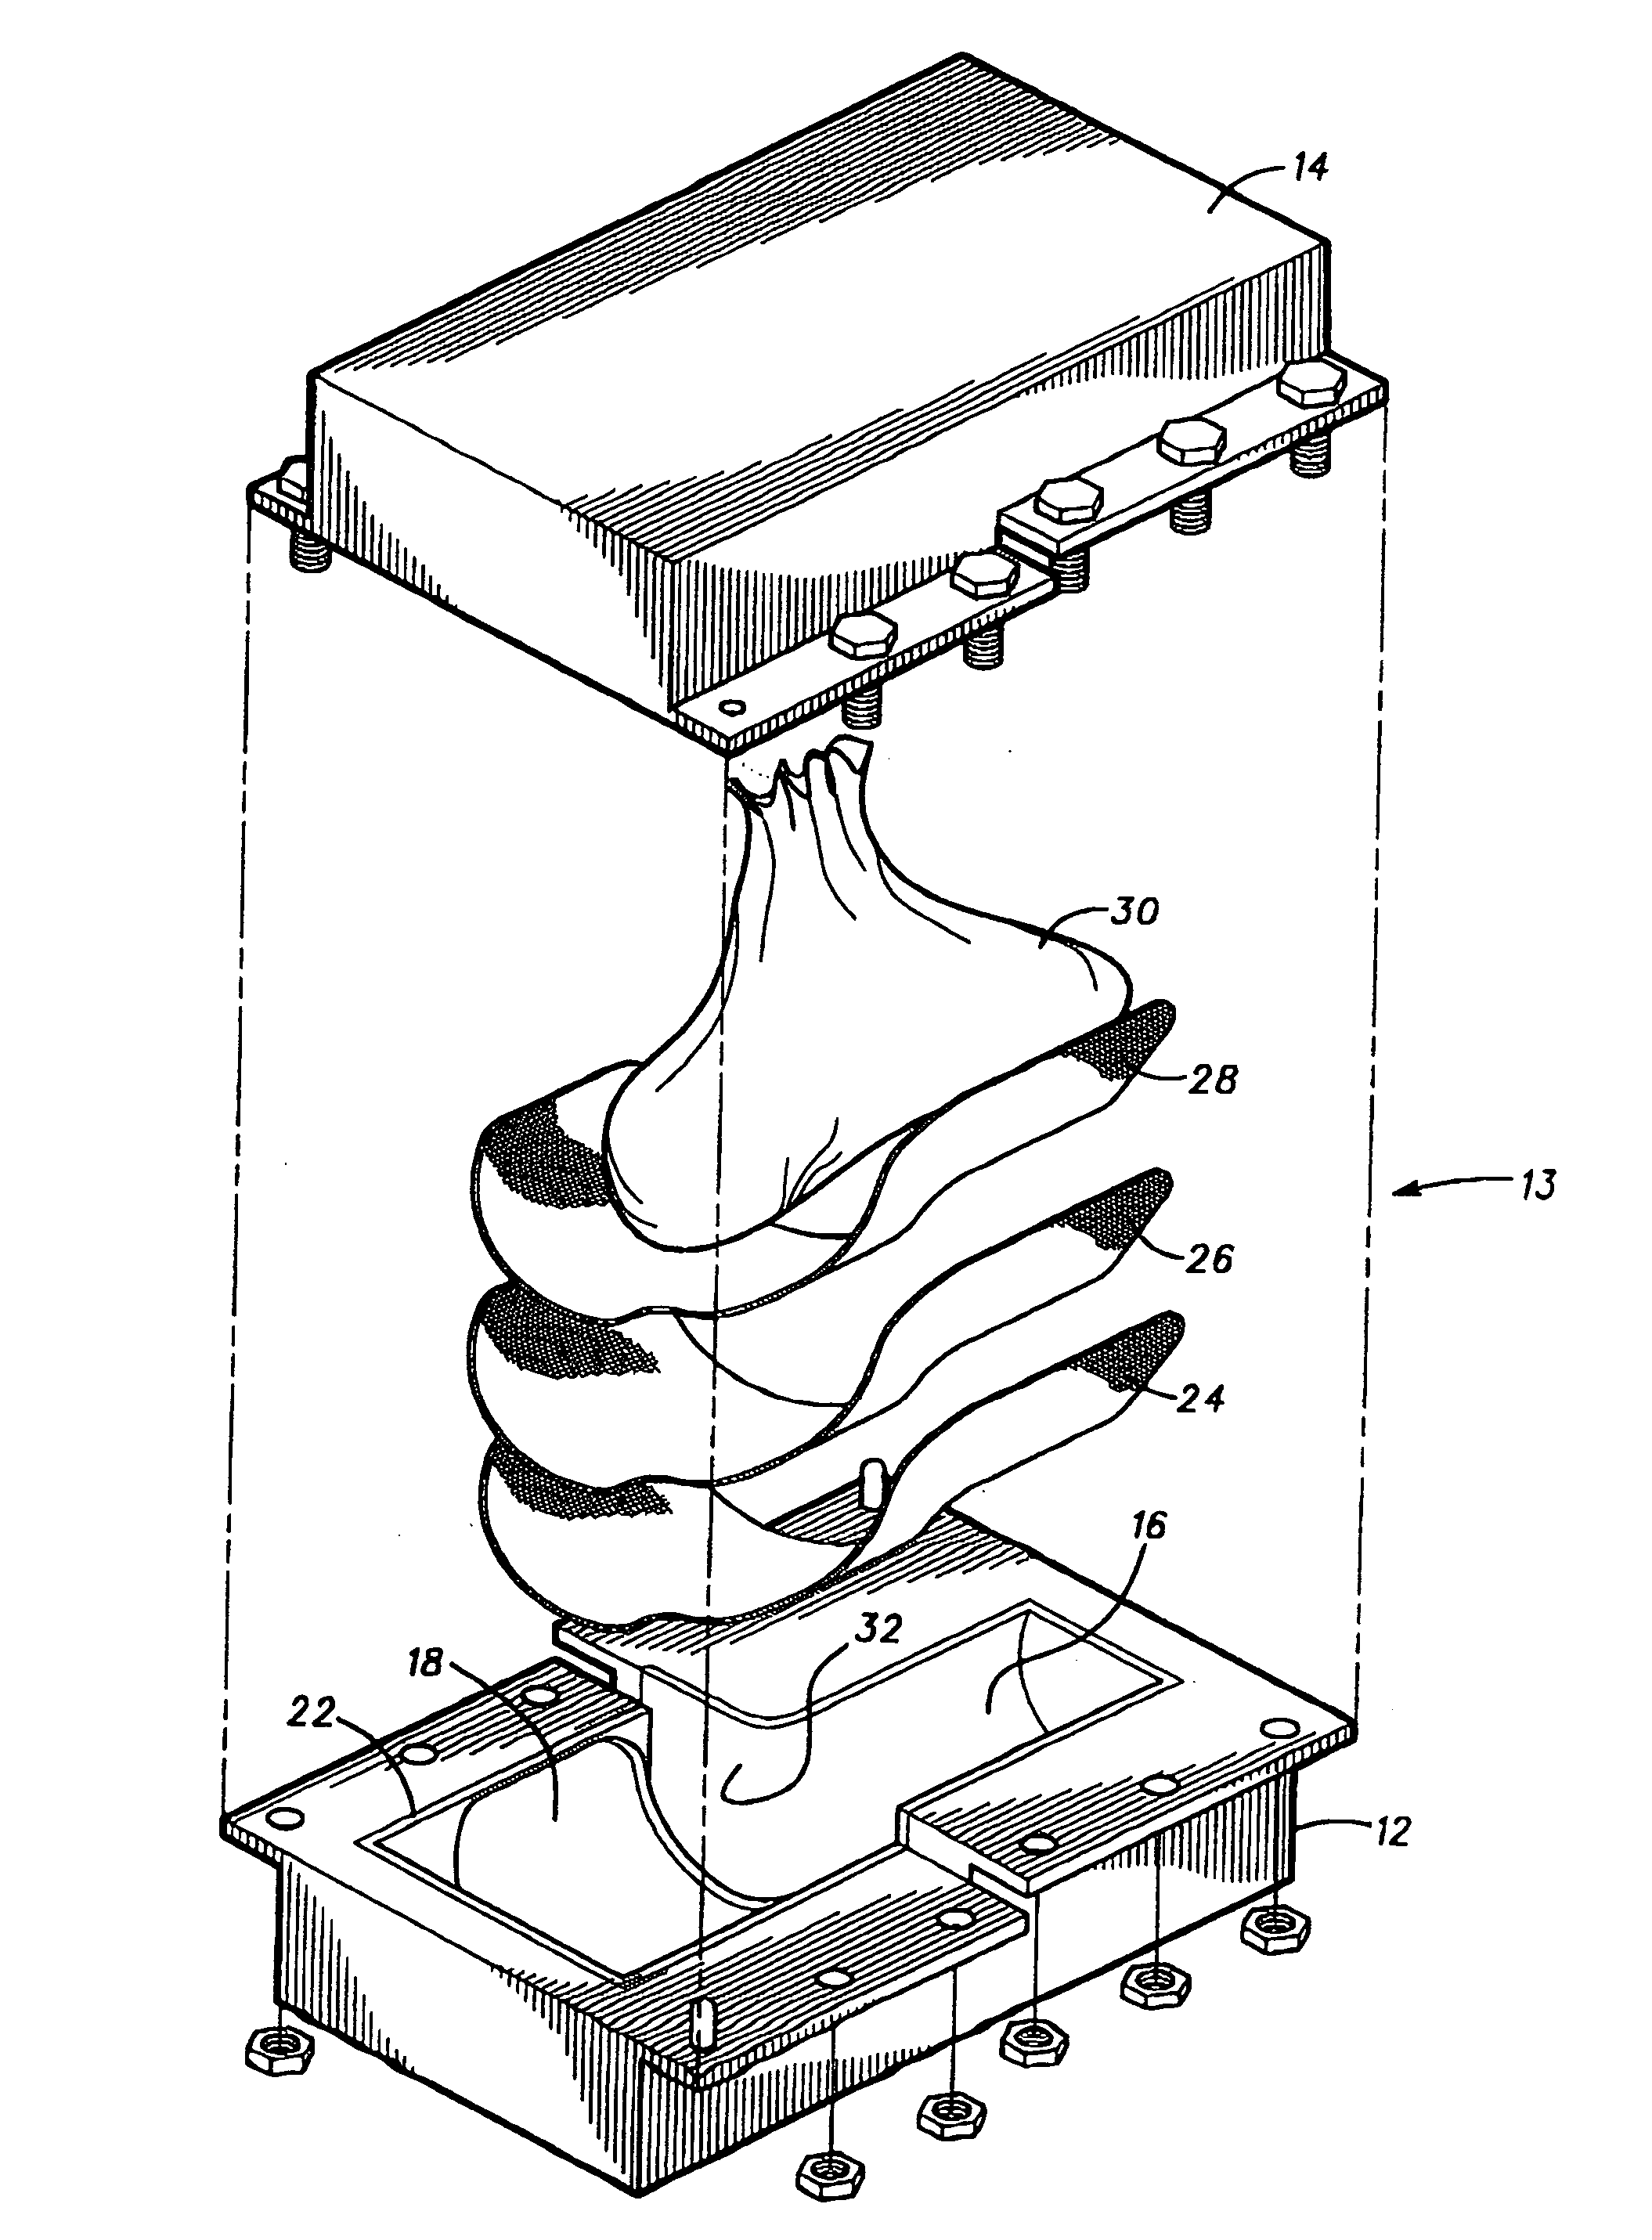 Method of manufacturing composite panels